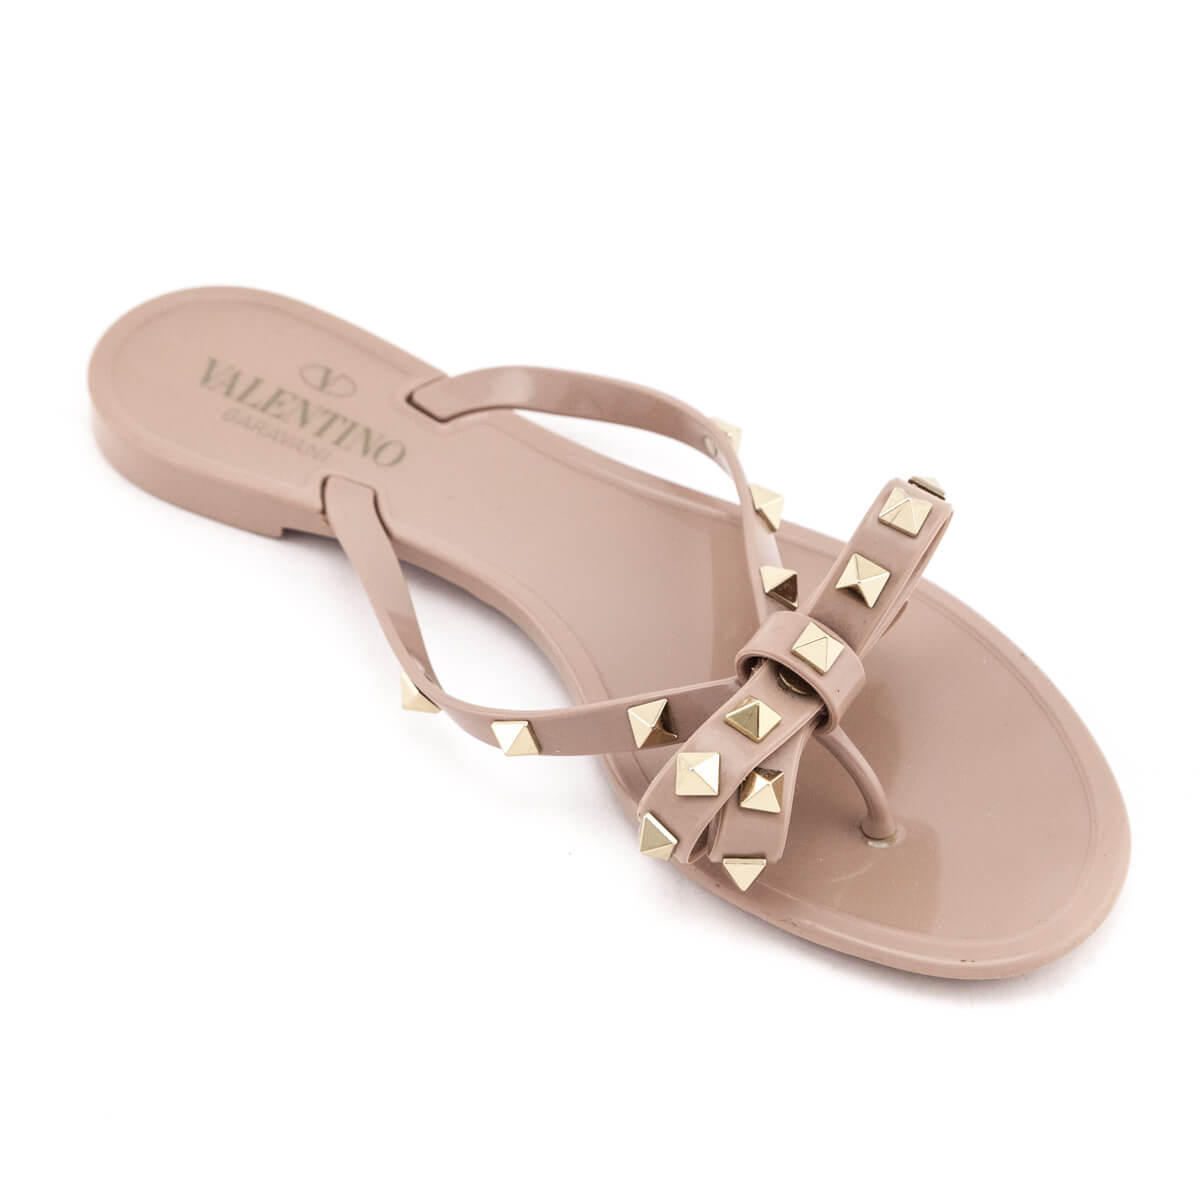 Valentino Nude Rockstud Jelly Sandals Size US 8 | EU 38 - Love that Bag etc - Preowned Authentic Designer Handbags & Preloved Fashions